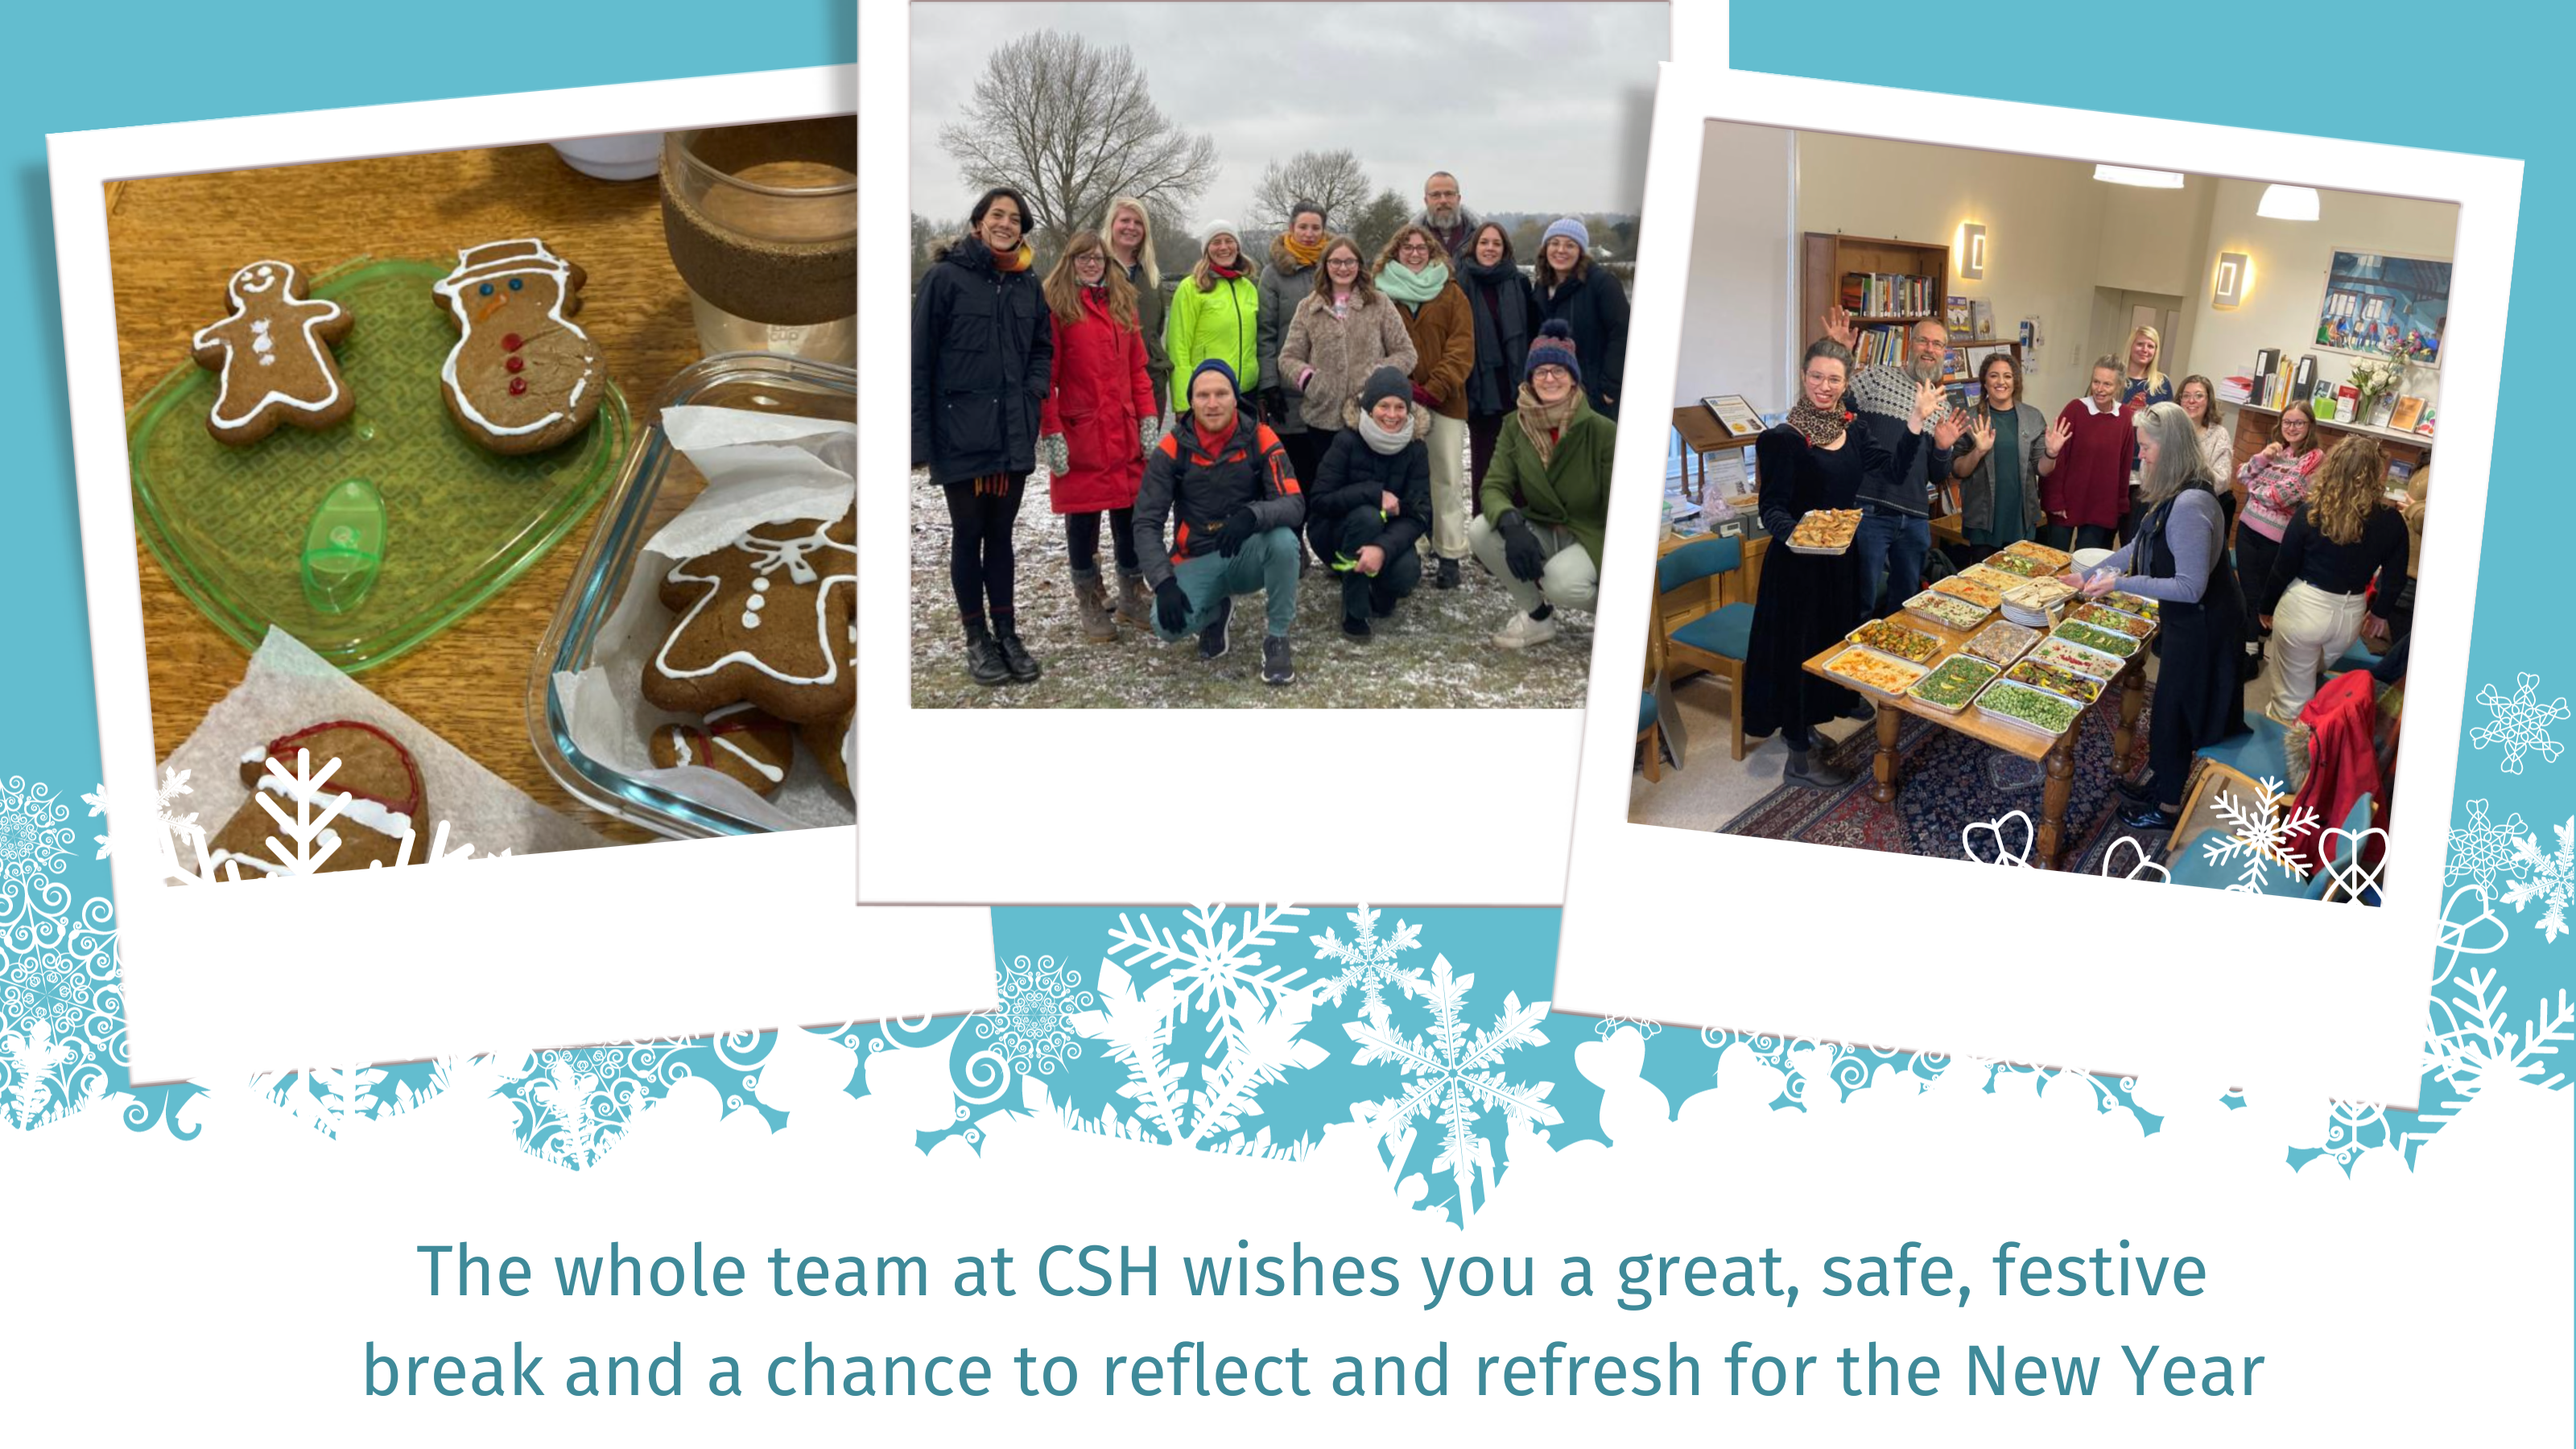 The whole team at CSH wishes you a great, safe, festive break and a chance to reflect and refresh for the New Year